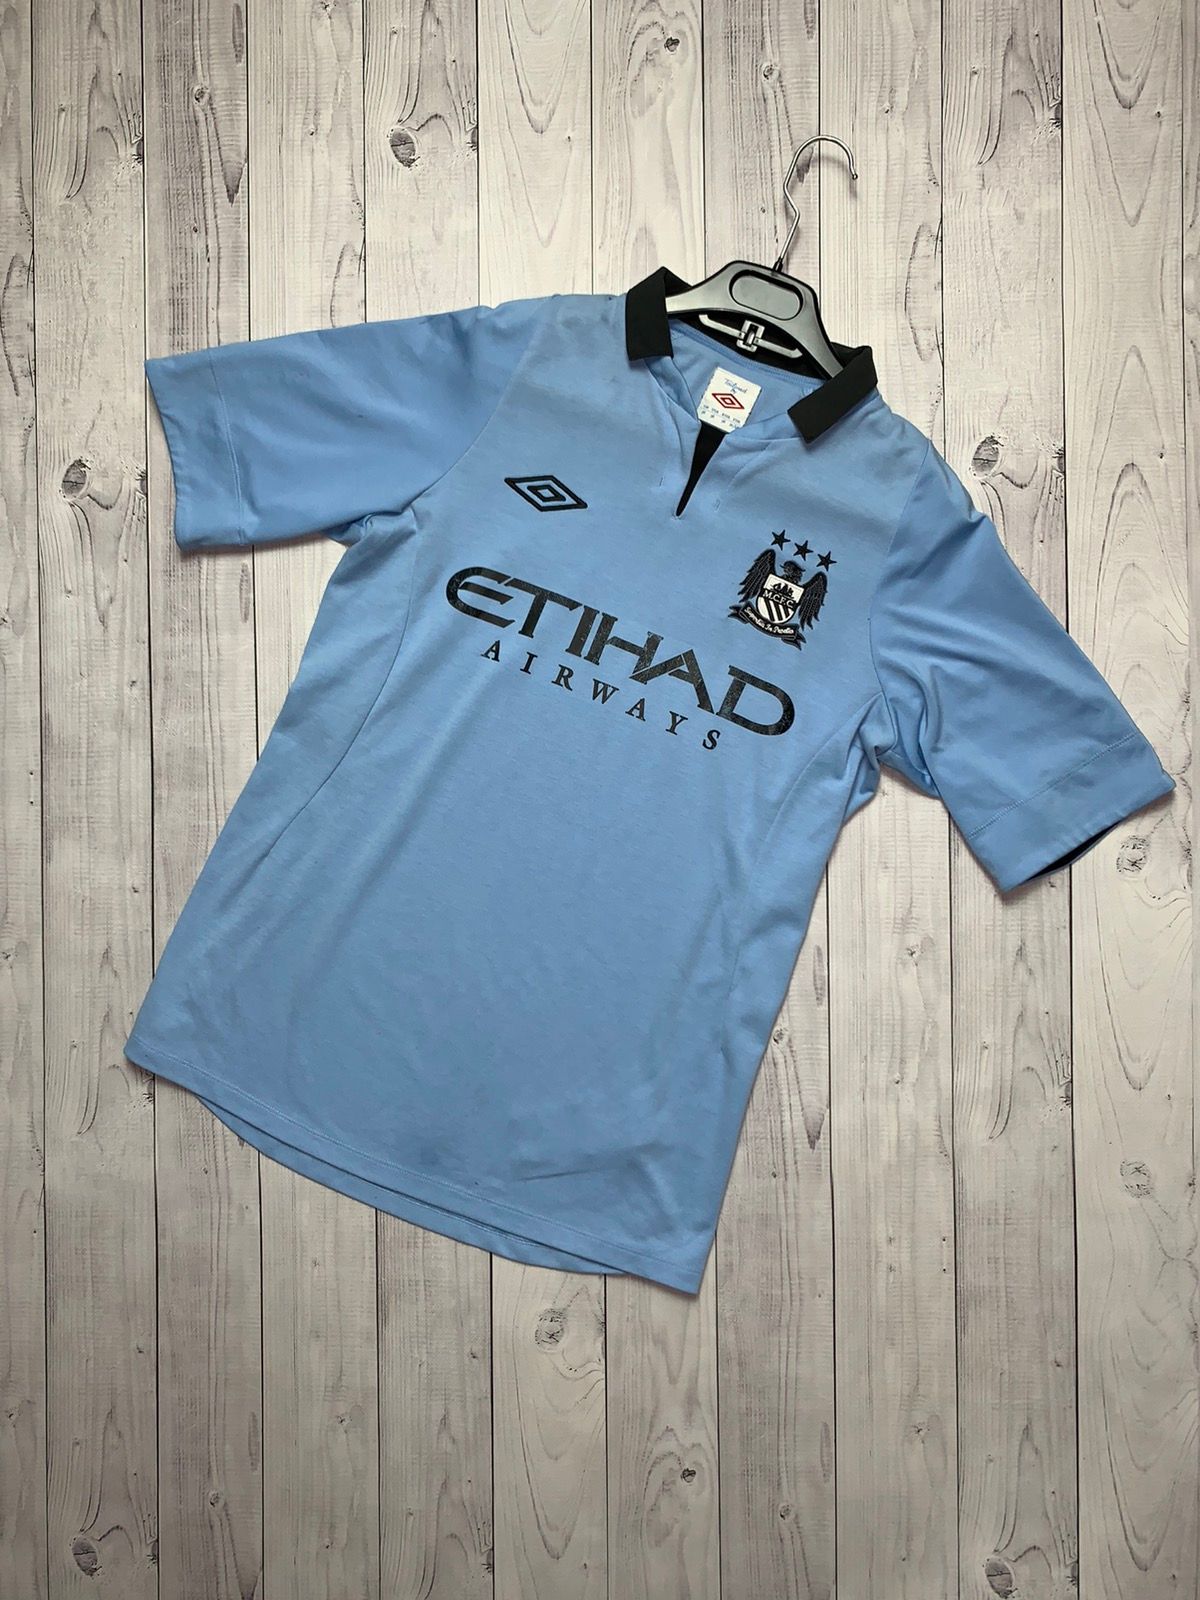 Pre-owned Soccer Jersey X Umbro Vintage Soccer Jersey Manchester City Umbro Size S In Blue